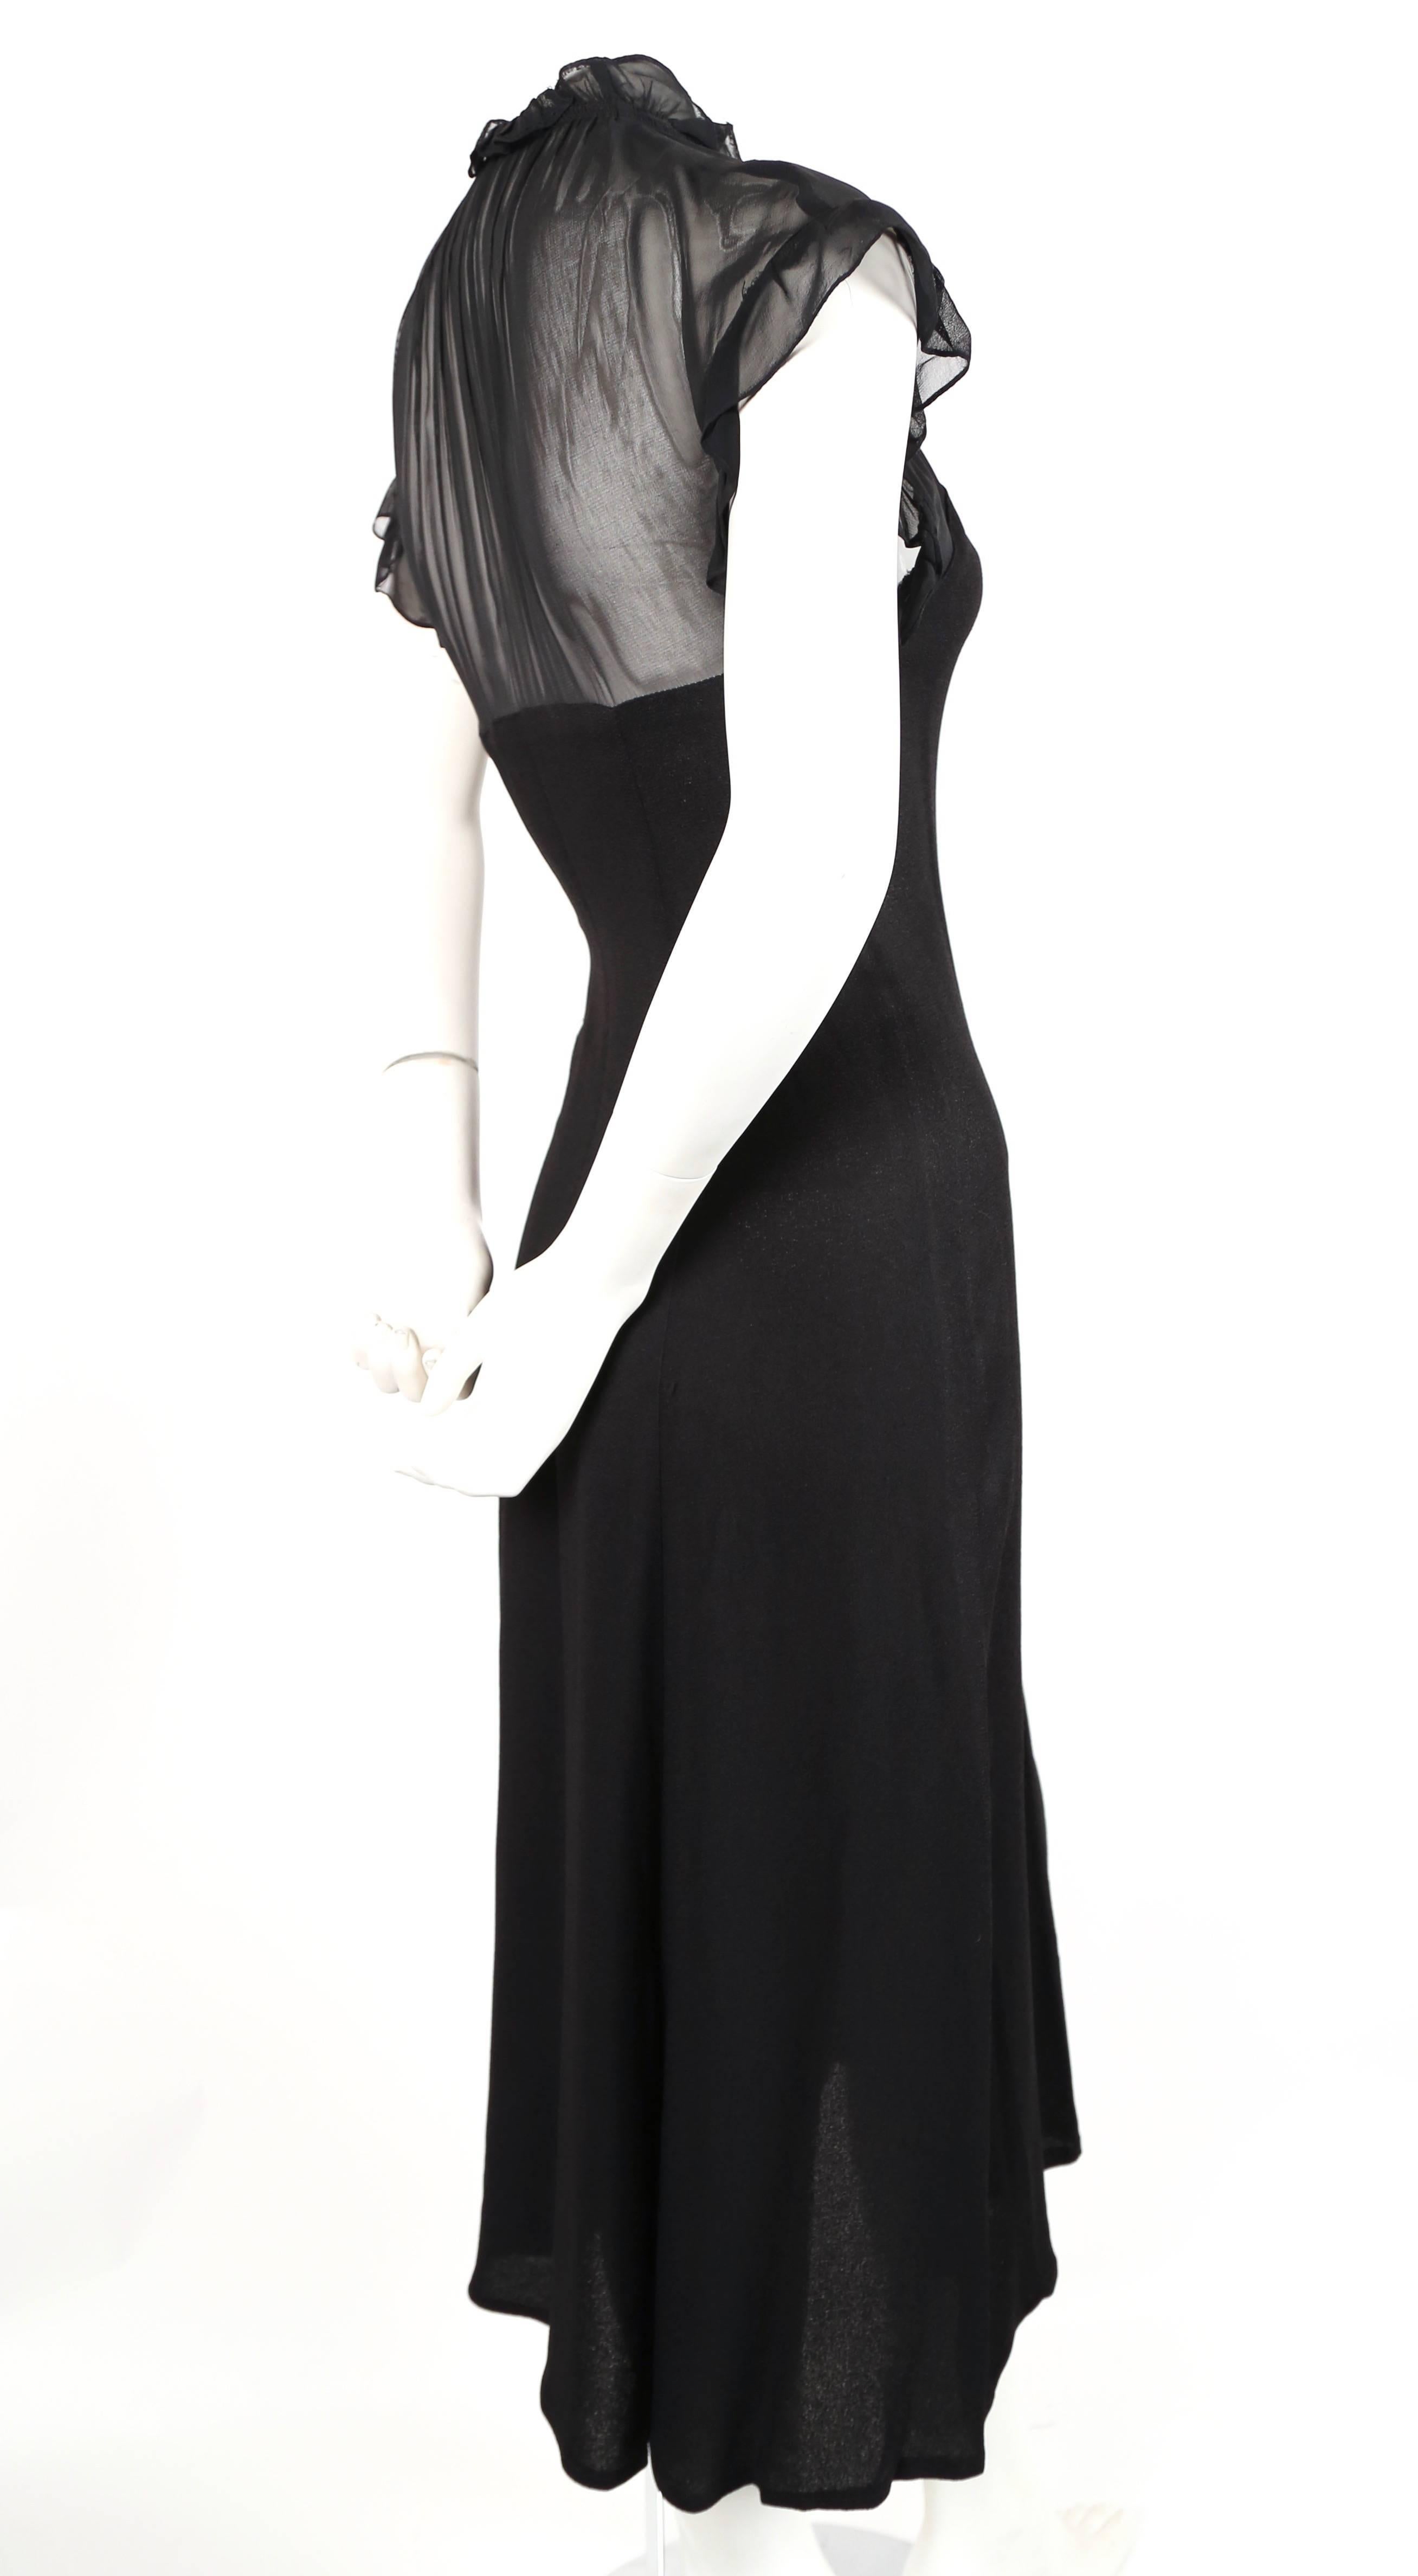 Black moss crepe dress with sheer neckline and button front designed by Radley dating to the 1970's. Beautiful sweetheart neck. This dress is commonly attributed to Ossie Clark. UK size 10. Fits a US 4. Approximate measurements (unstretched): bust